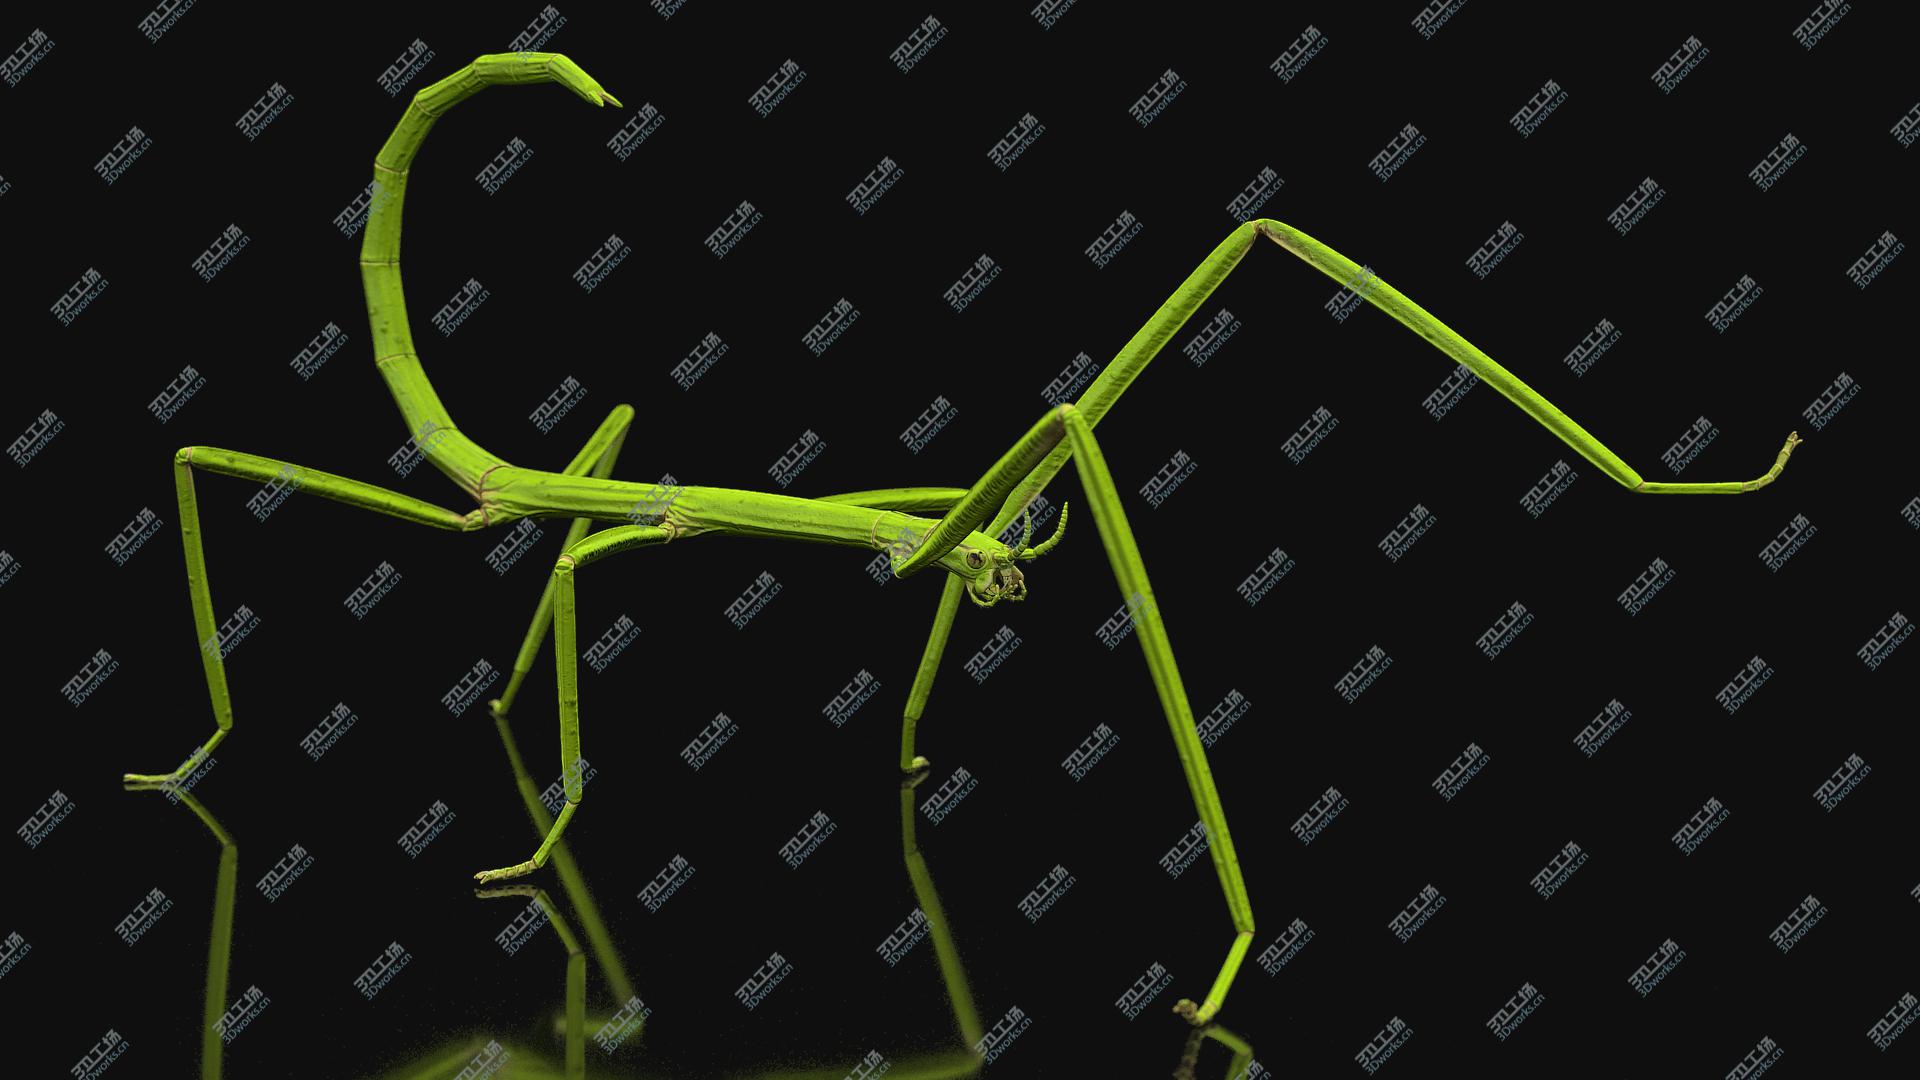 images/goods_img/202105071/Stick Insect Green Rigged 3D model/2.jpg